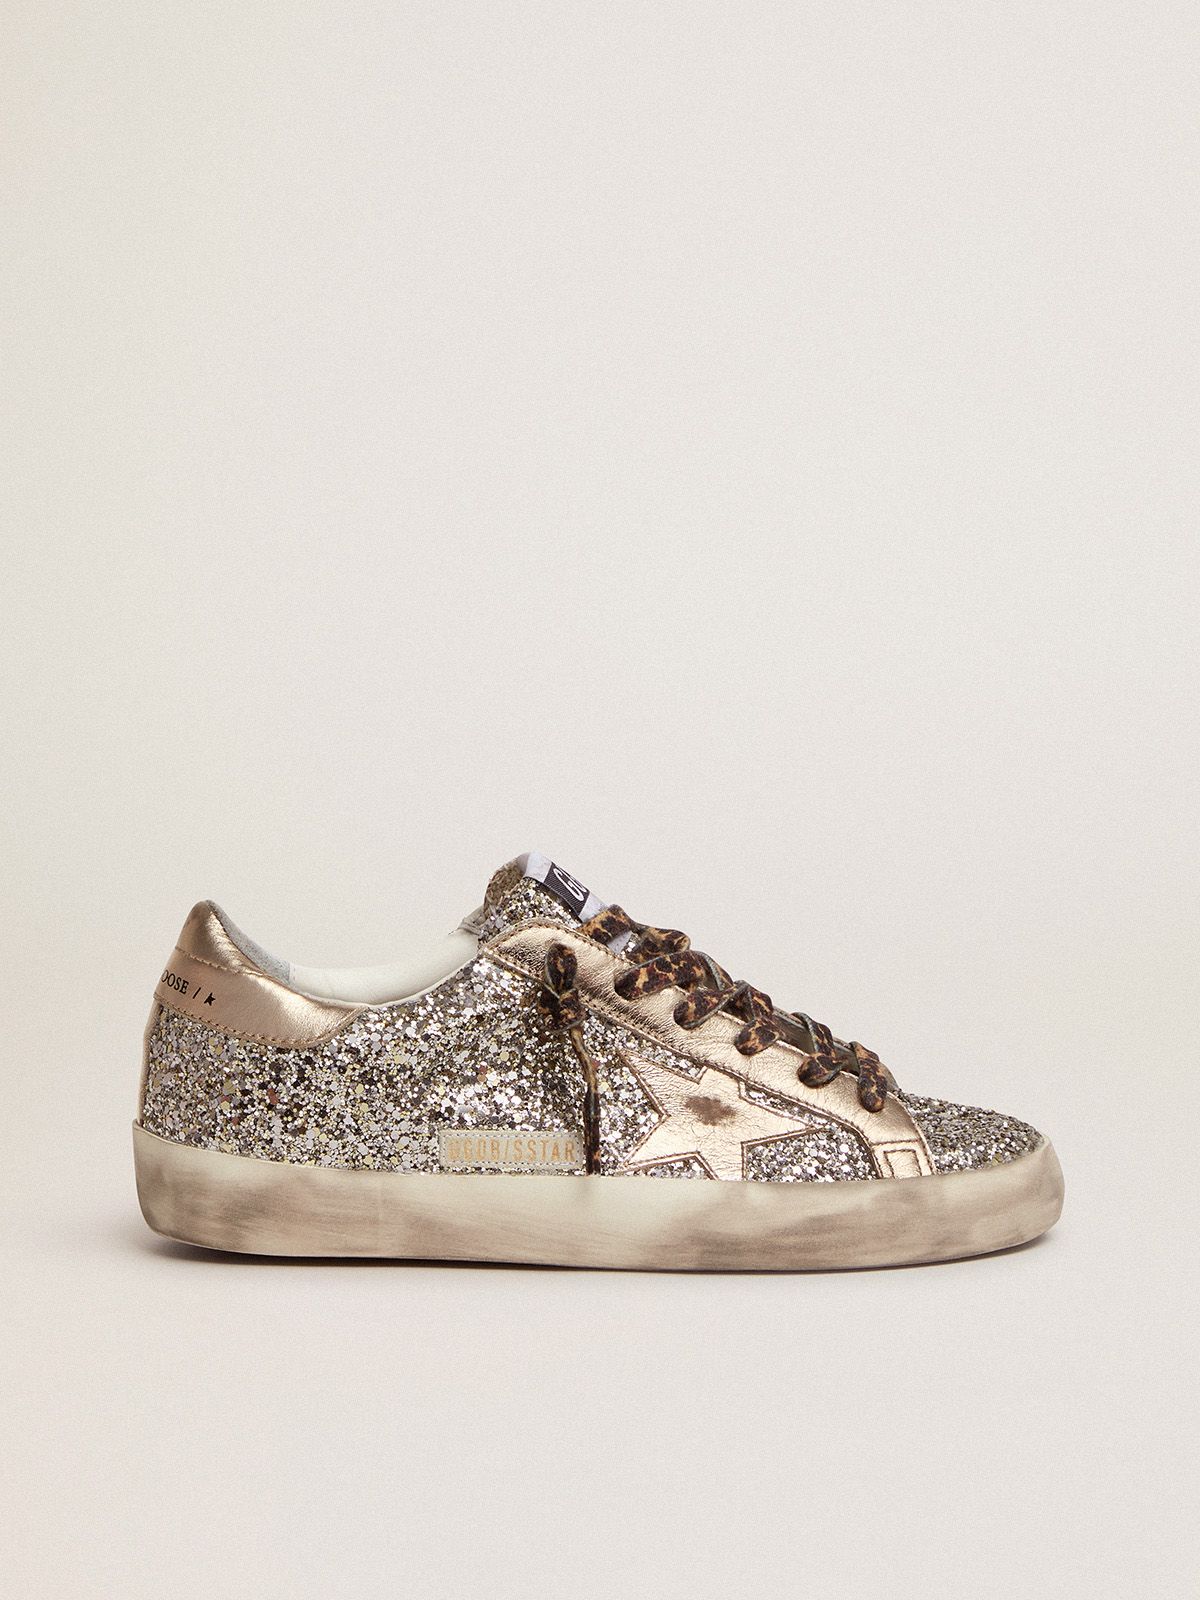 golden goose laminated heel tab sneakers platinum-colored tone-on-tone Super-Star and in star glitter leather with